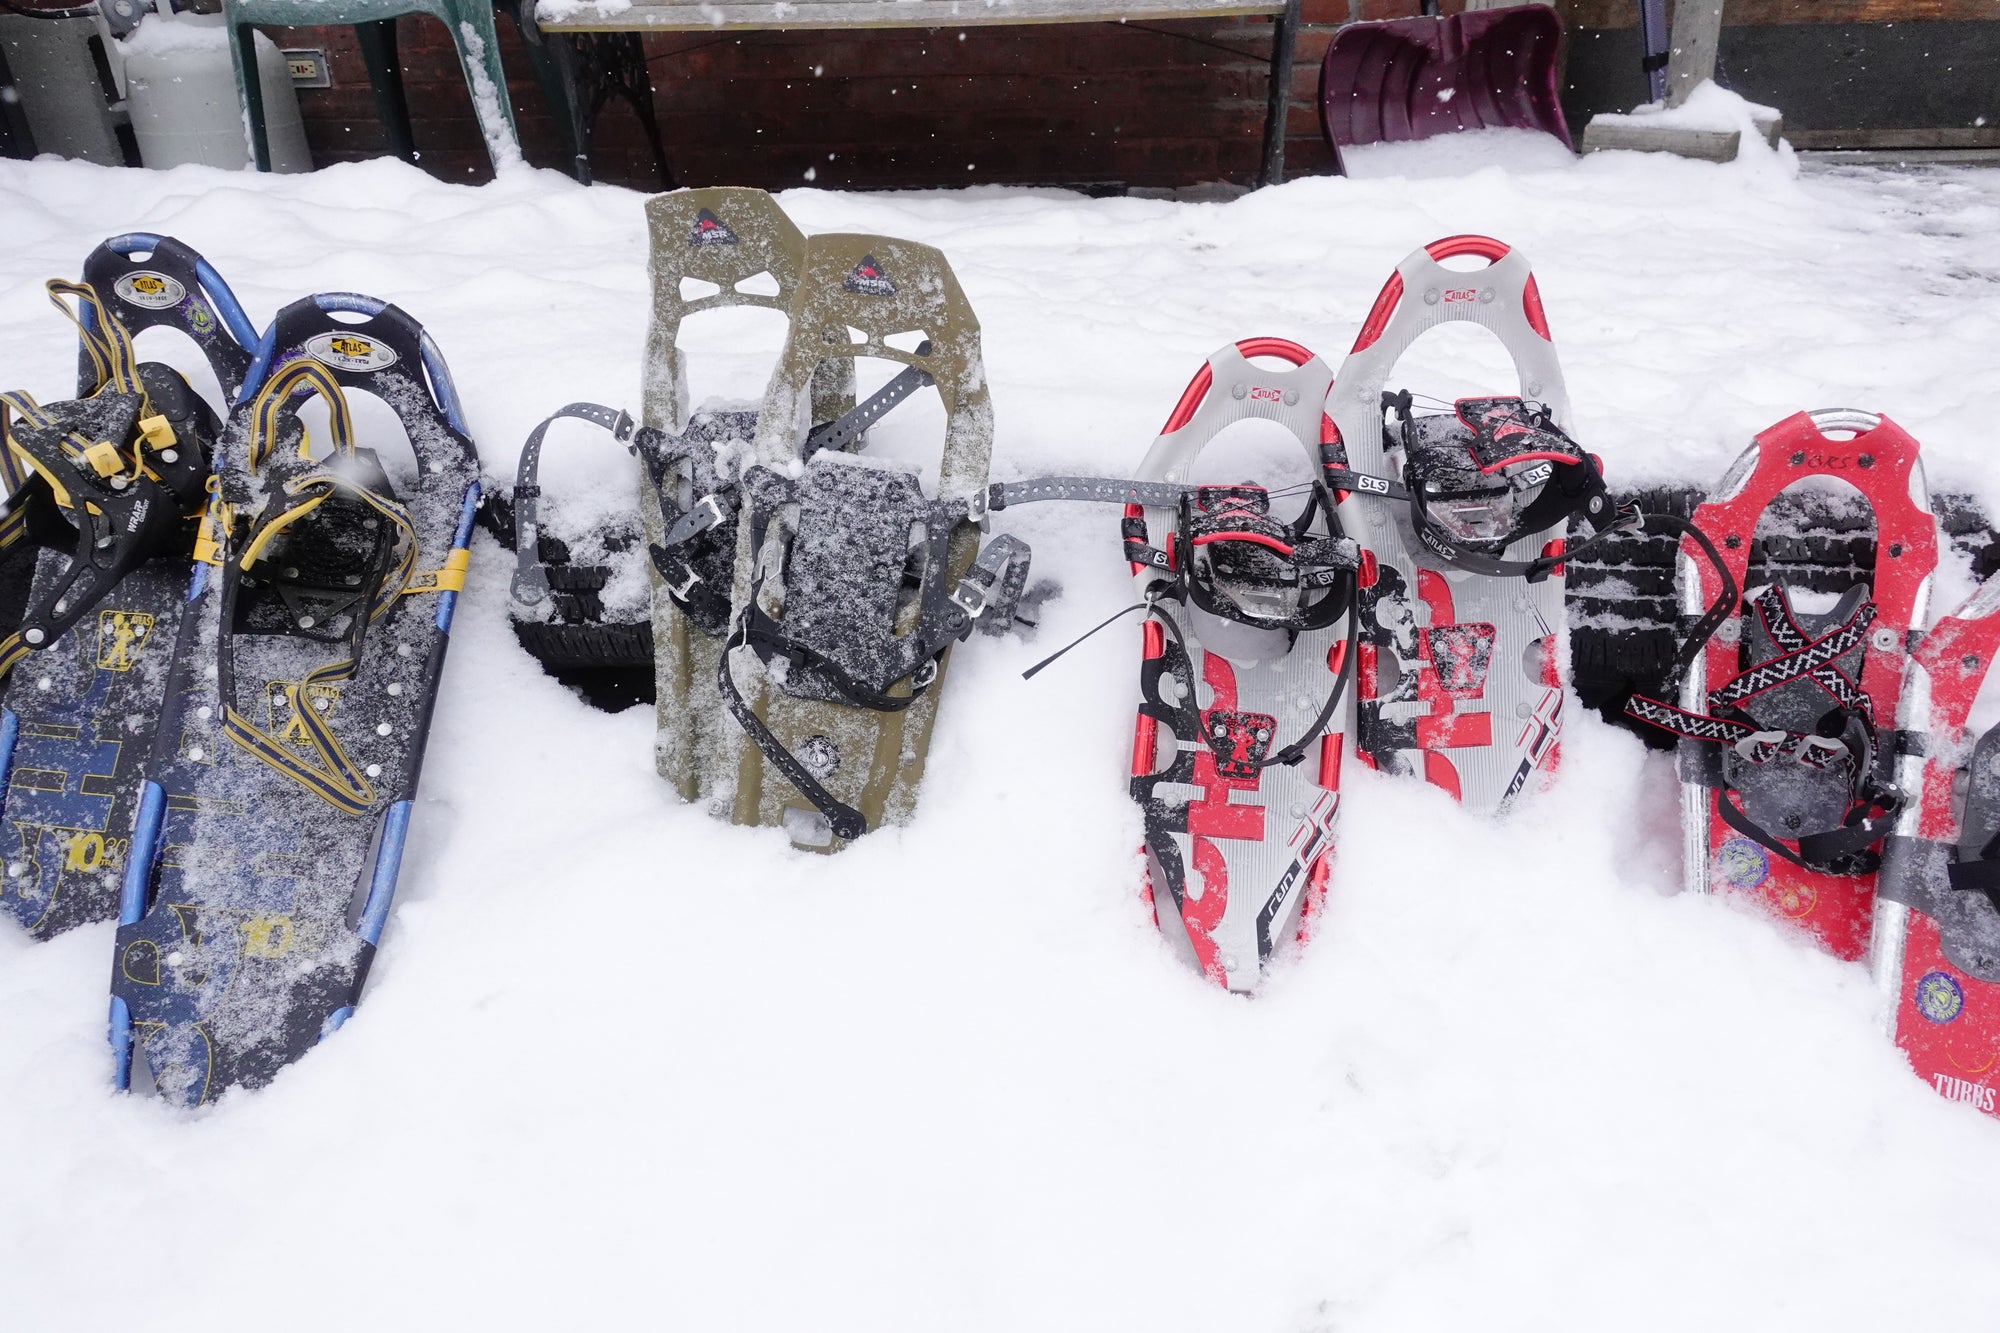 Four pairs of snowshoes resting in the snow